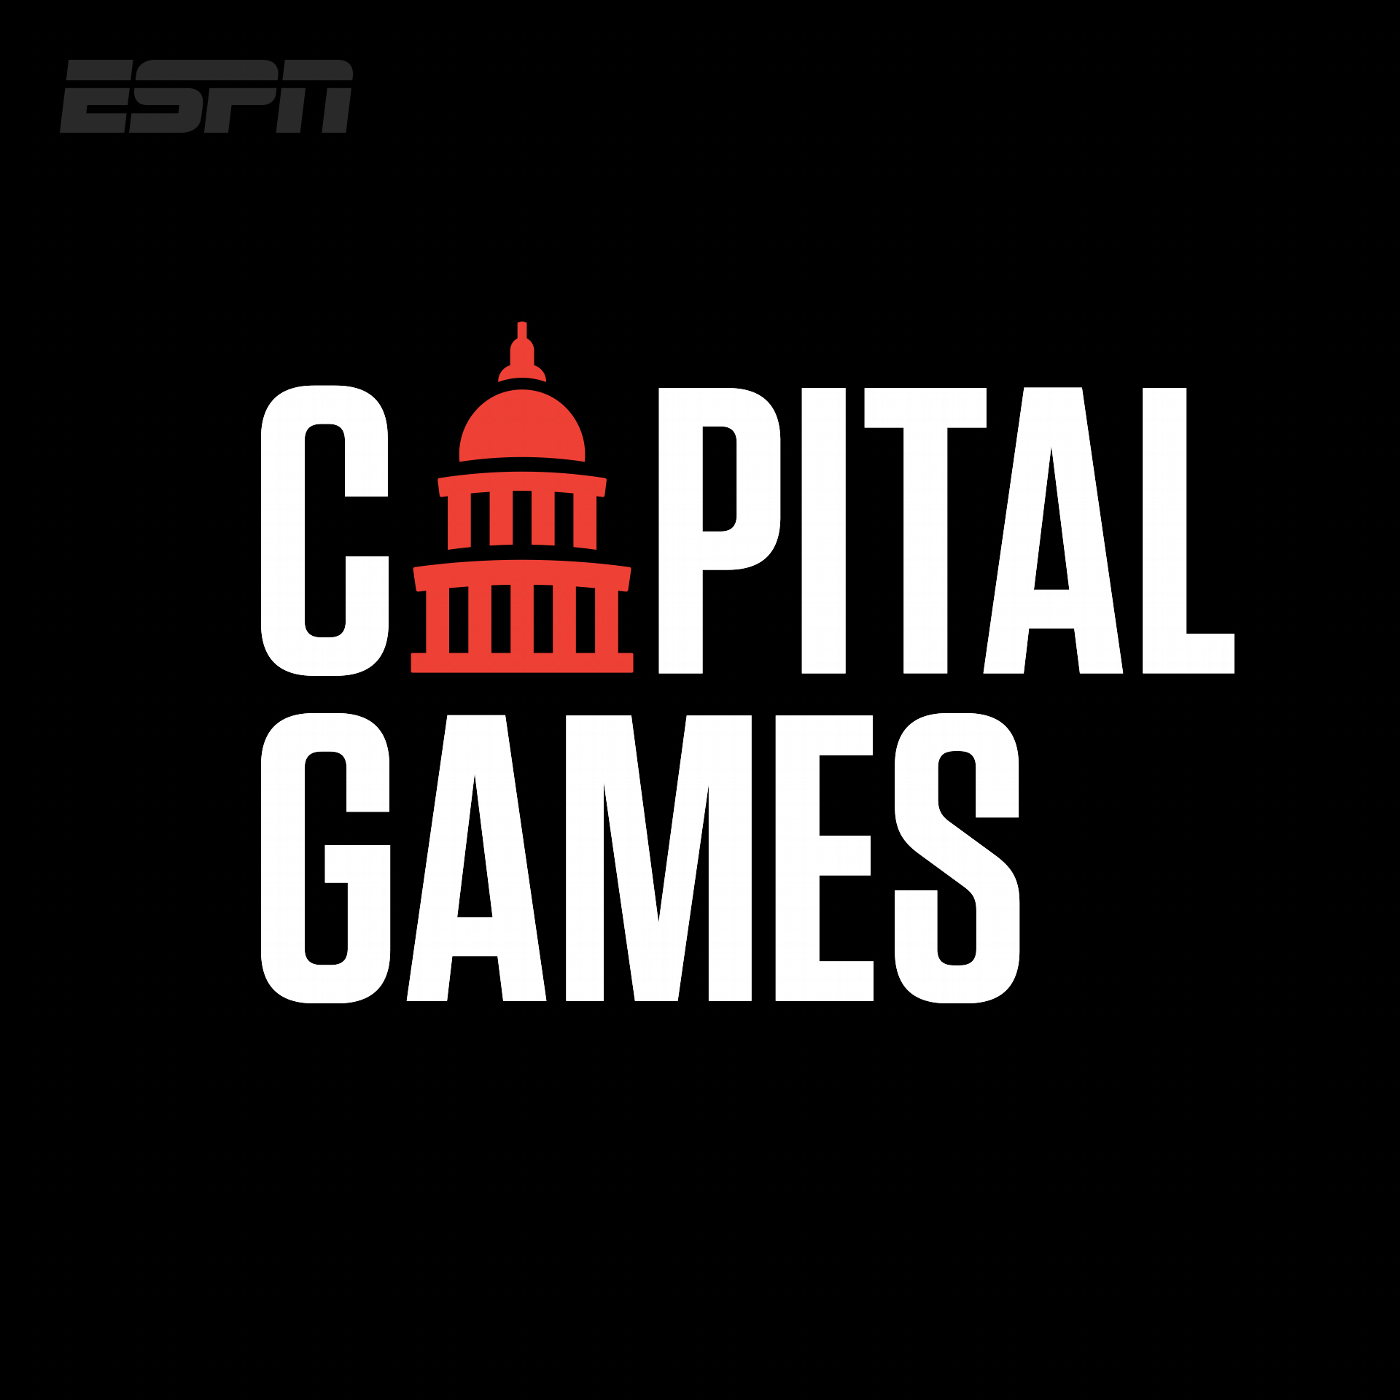 Capital Games with Andy Katz and Rick Klein